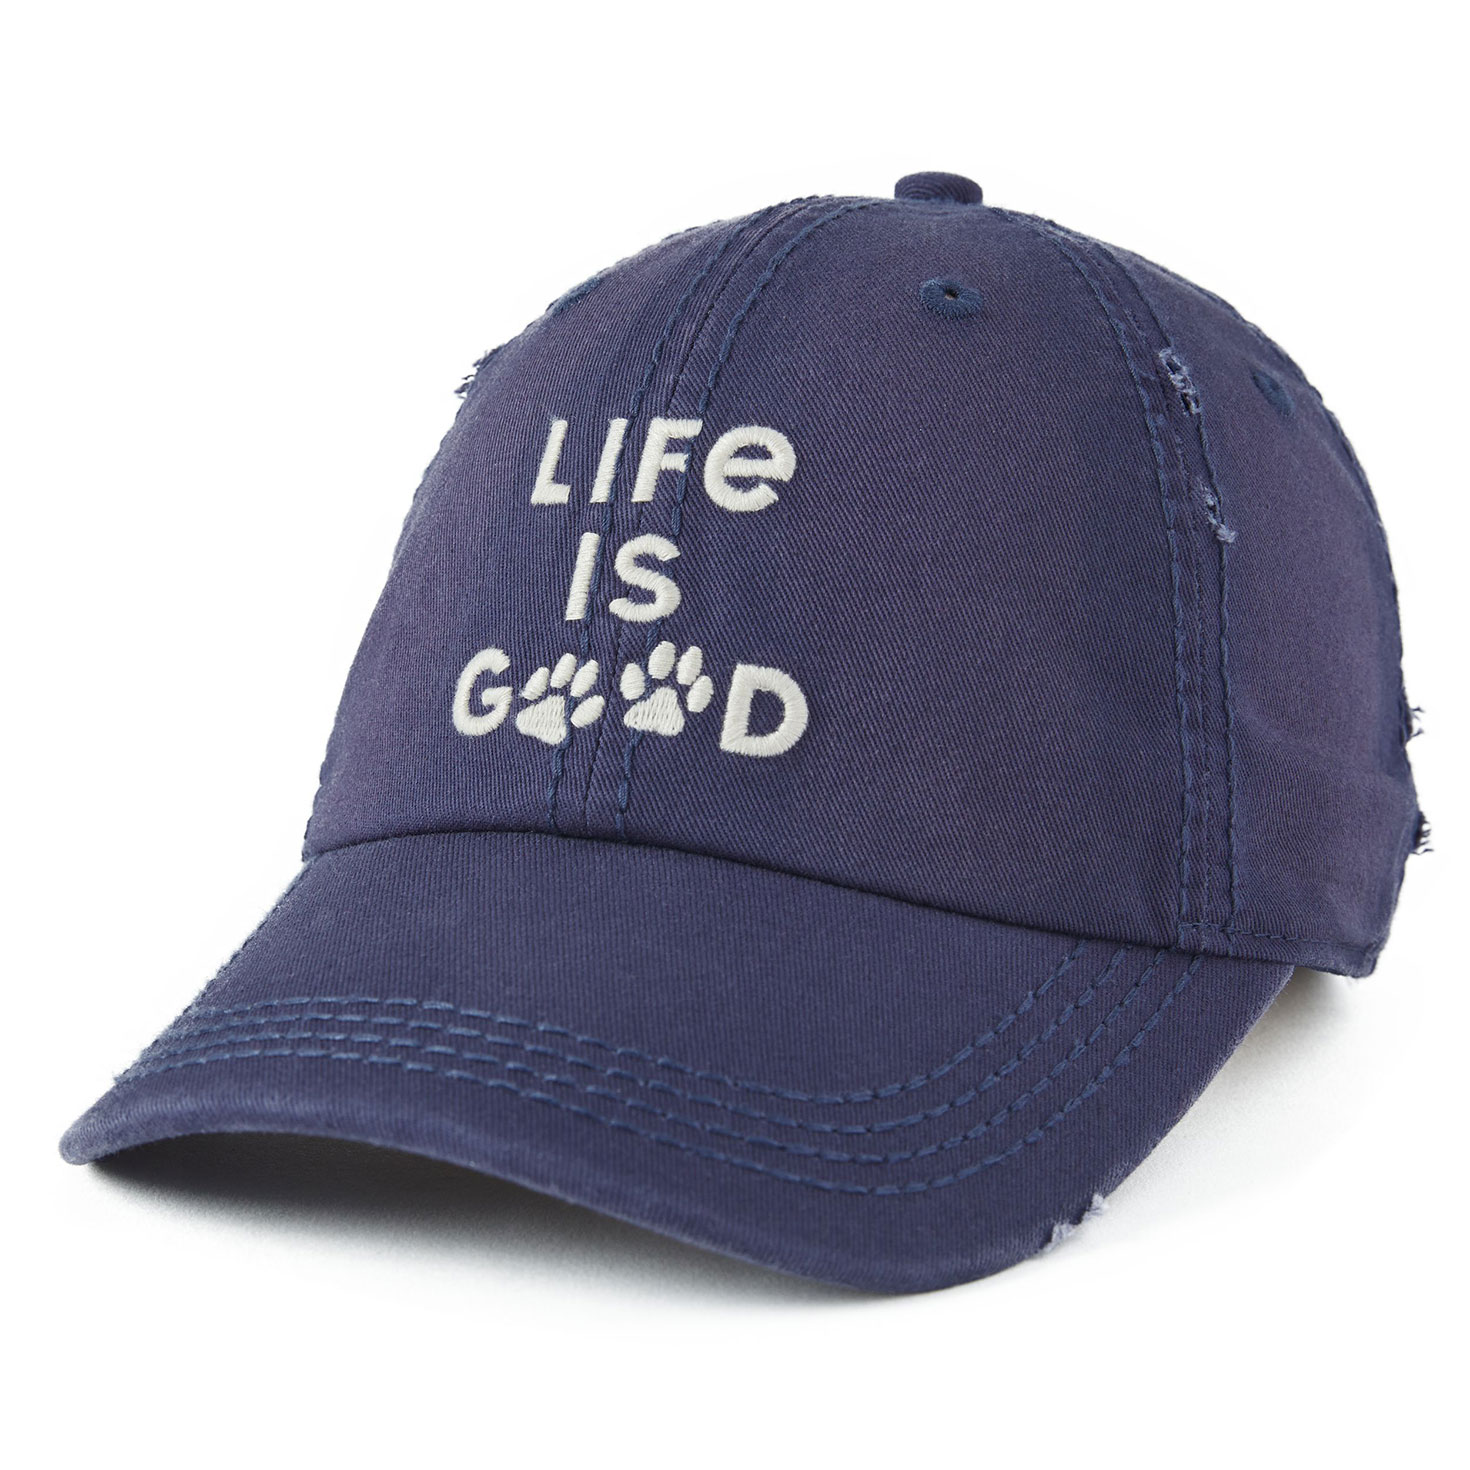 https://www.hallmark.com/on/demandware.static/-/Sites-hallmark-master/default/dw0cb6a852/images/finished-goods/products/108437/Paw-Prints-Navy-Blue-Life-Is-Good-Baseball-Cap_108437_01.jpg